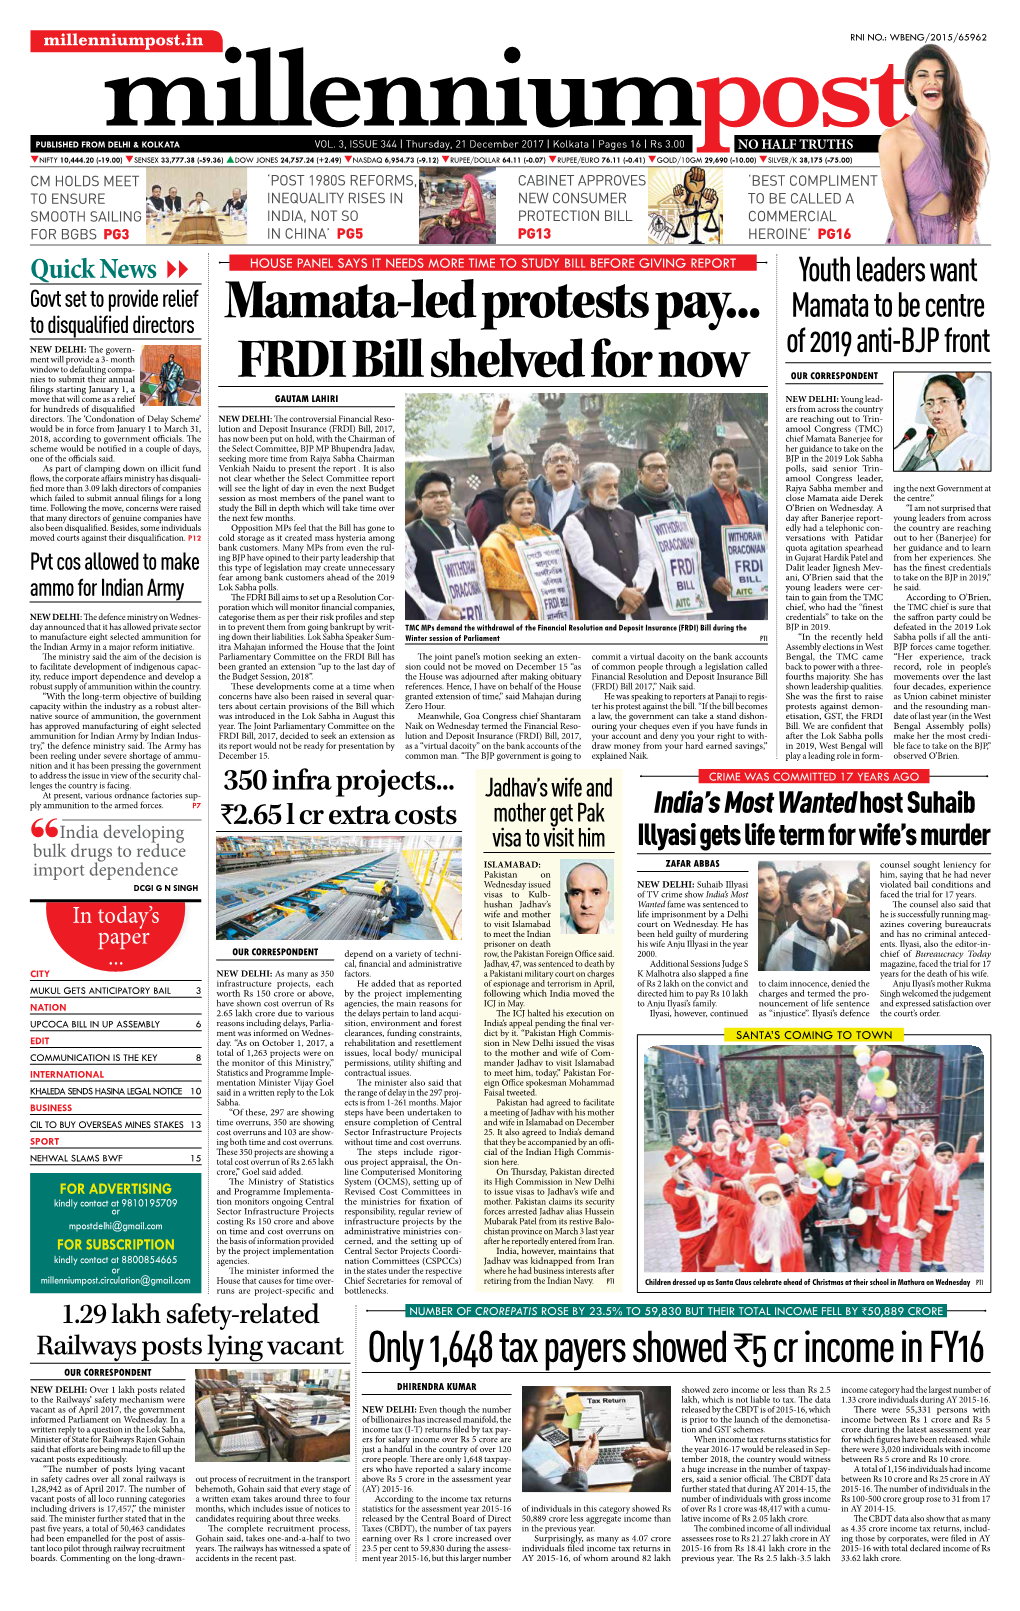 Mamata-Led Protests Pay... FRDI Bill Shelved For